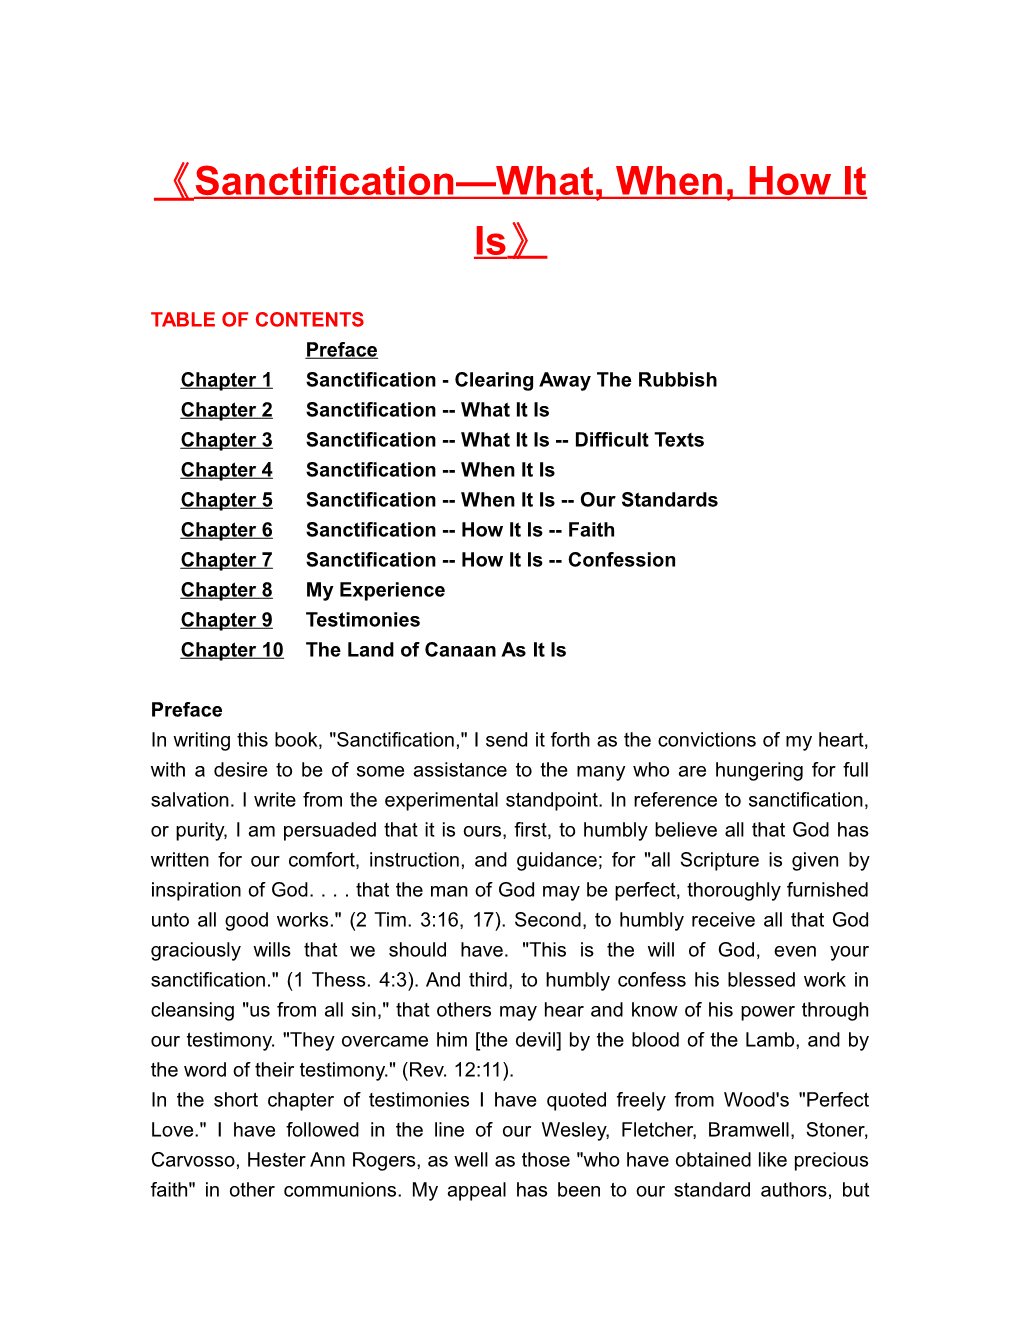 Sanctification What, When, How It Is